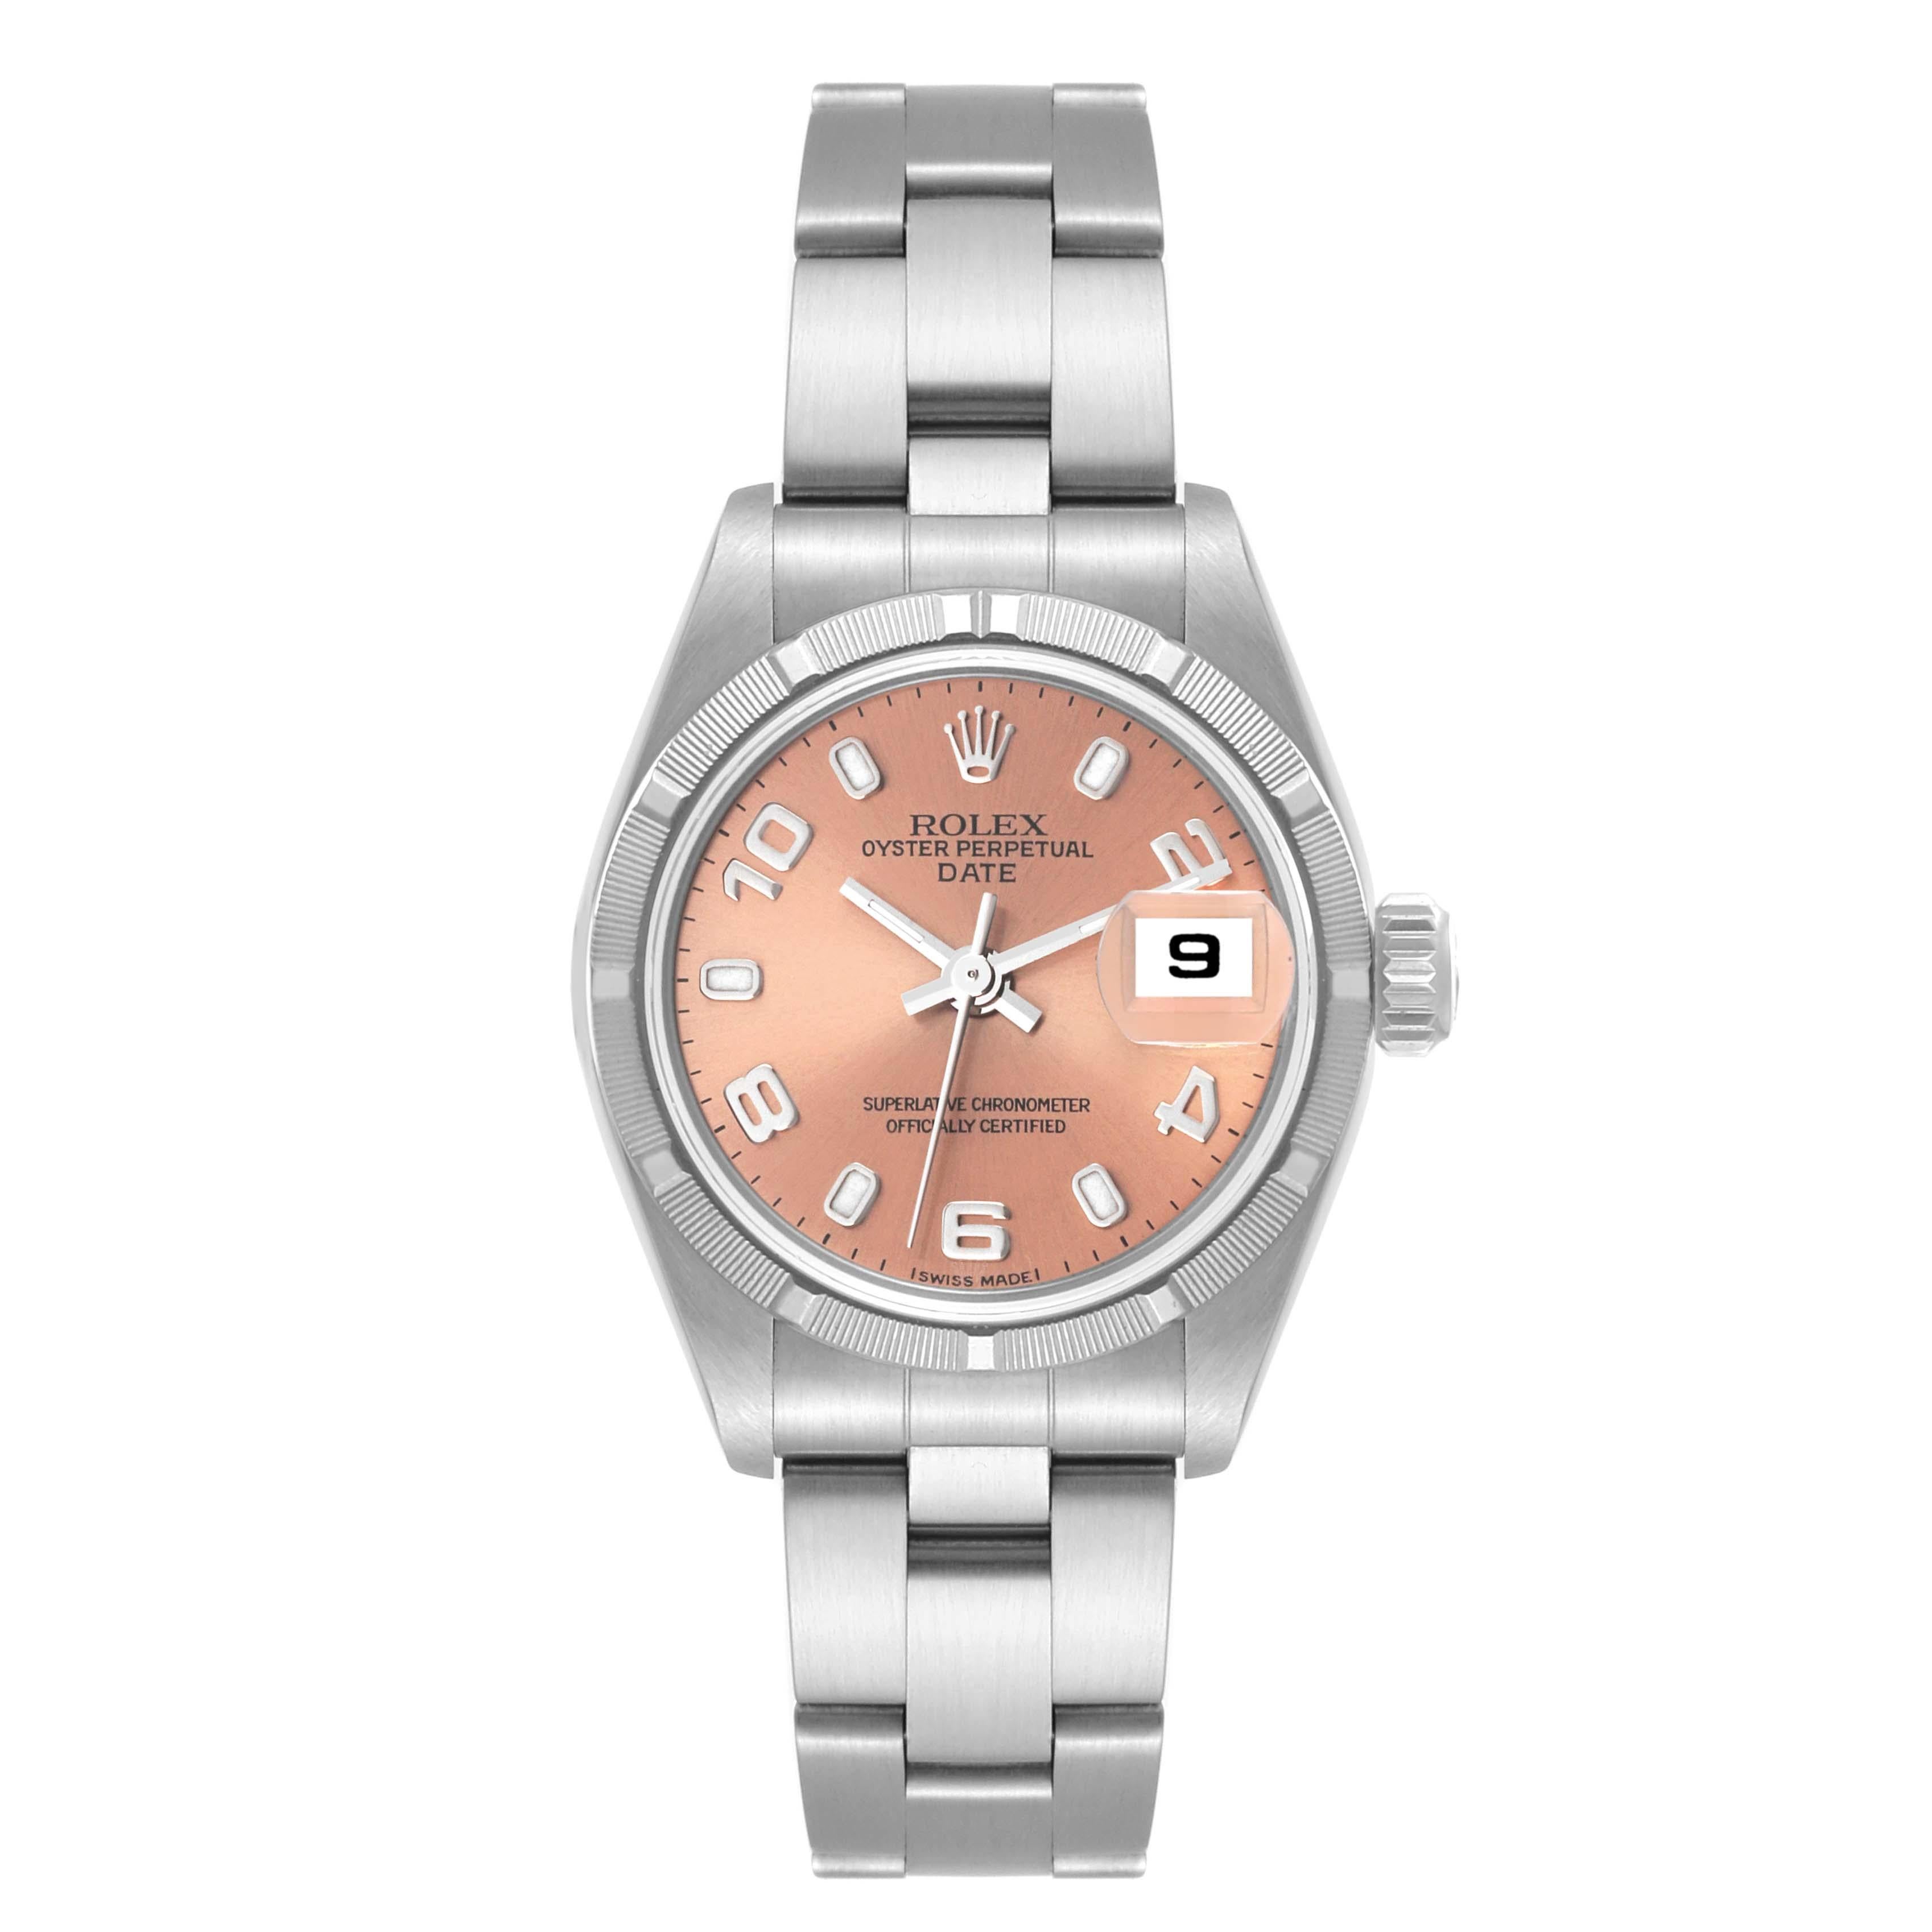 Rolex Date Salmon Dial Oyster Bracelet Steel Ladies Watch 79190. Officially certified chronometer self-winding movement. Stainless steel oyster case 26 mm in diameter. Rolex logo on a crown. Stainless steel engine turned bezel. Scratch resistant